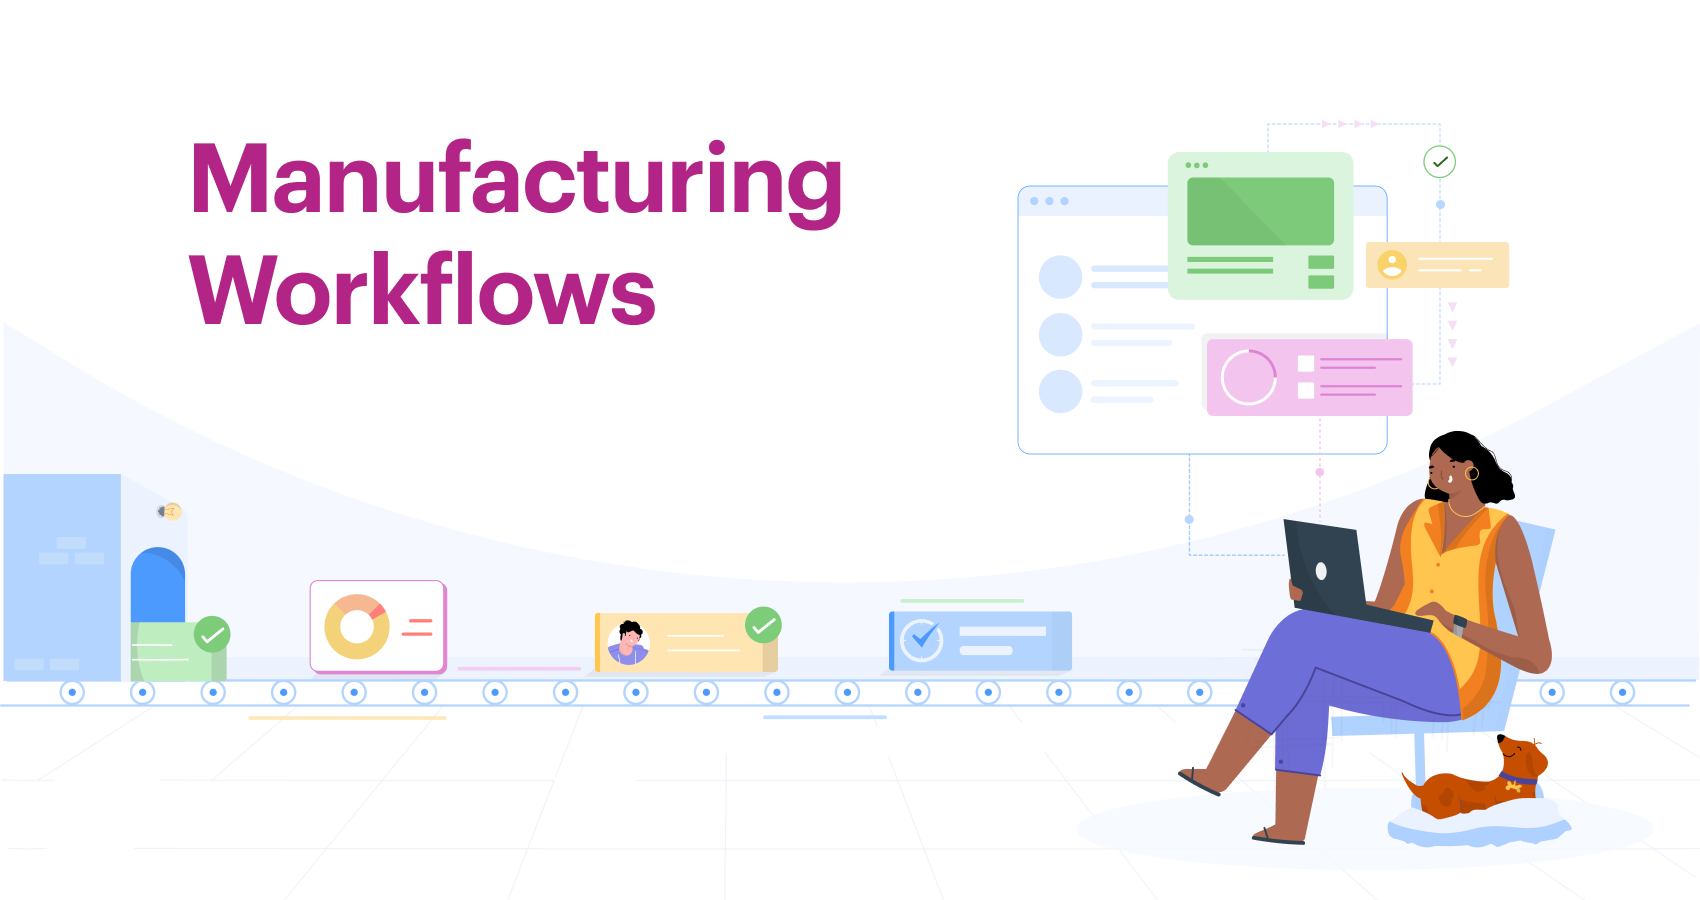 What is Manufacturing Workflows?